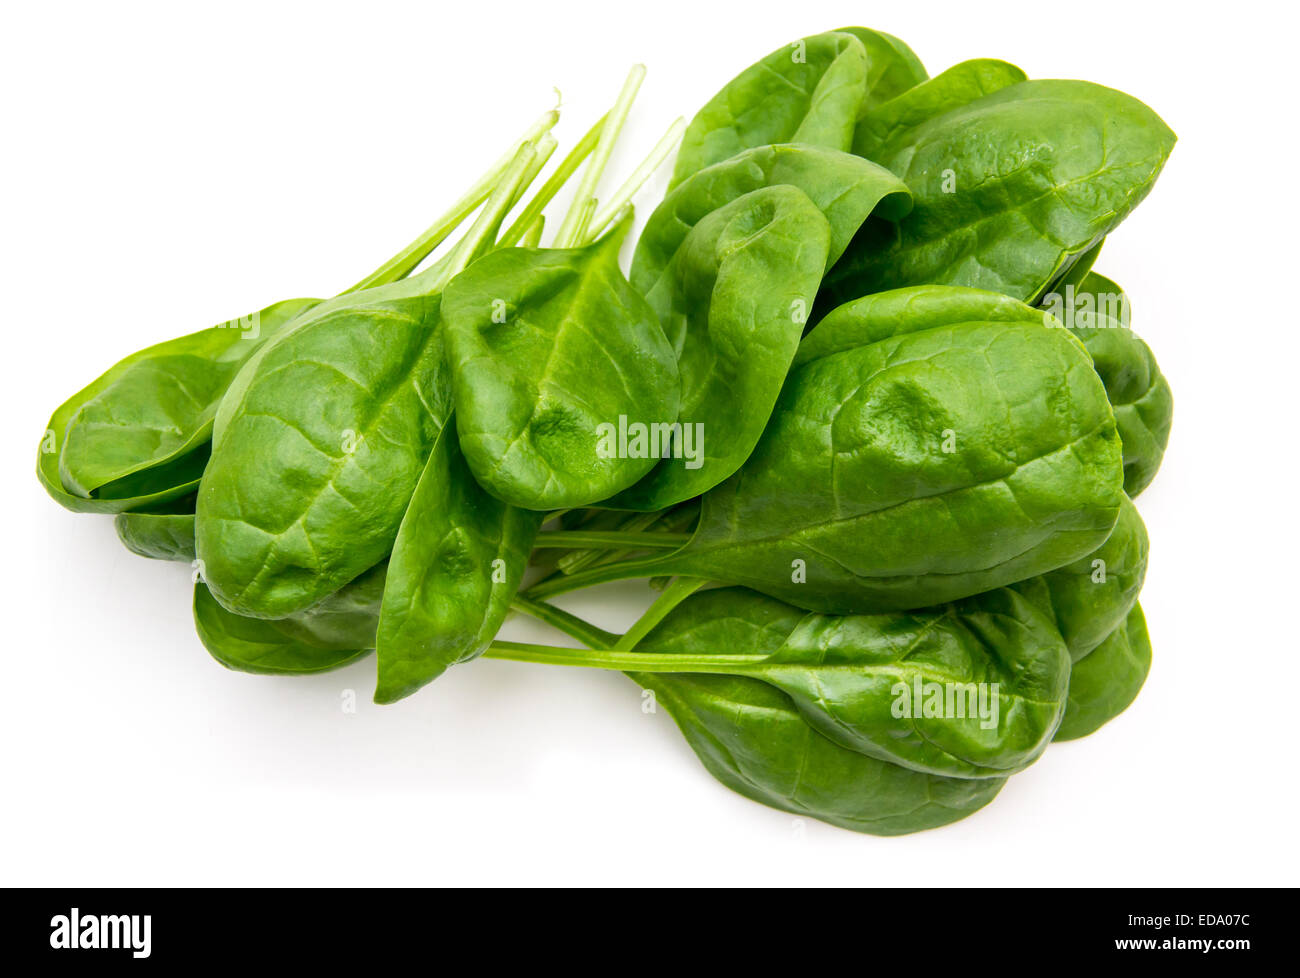 Fresh spinach leaves on a white background seen from above Stock Photo